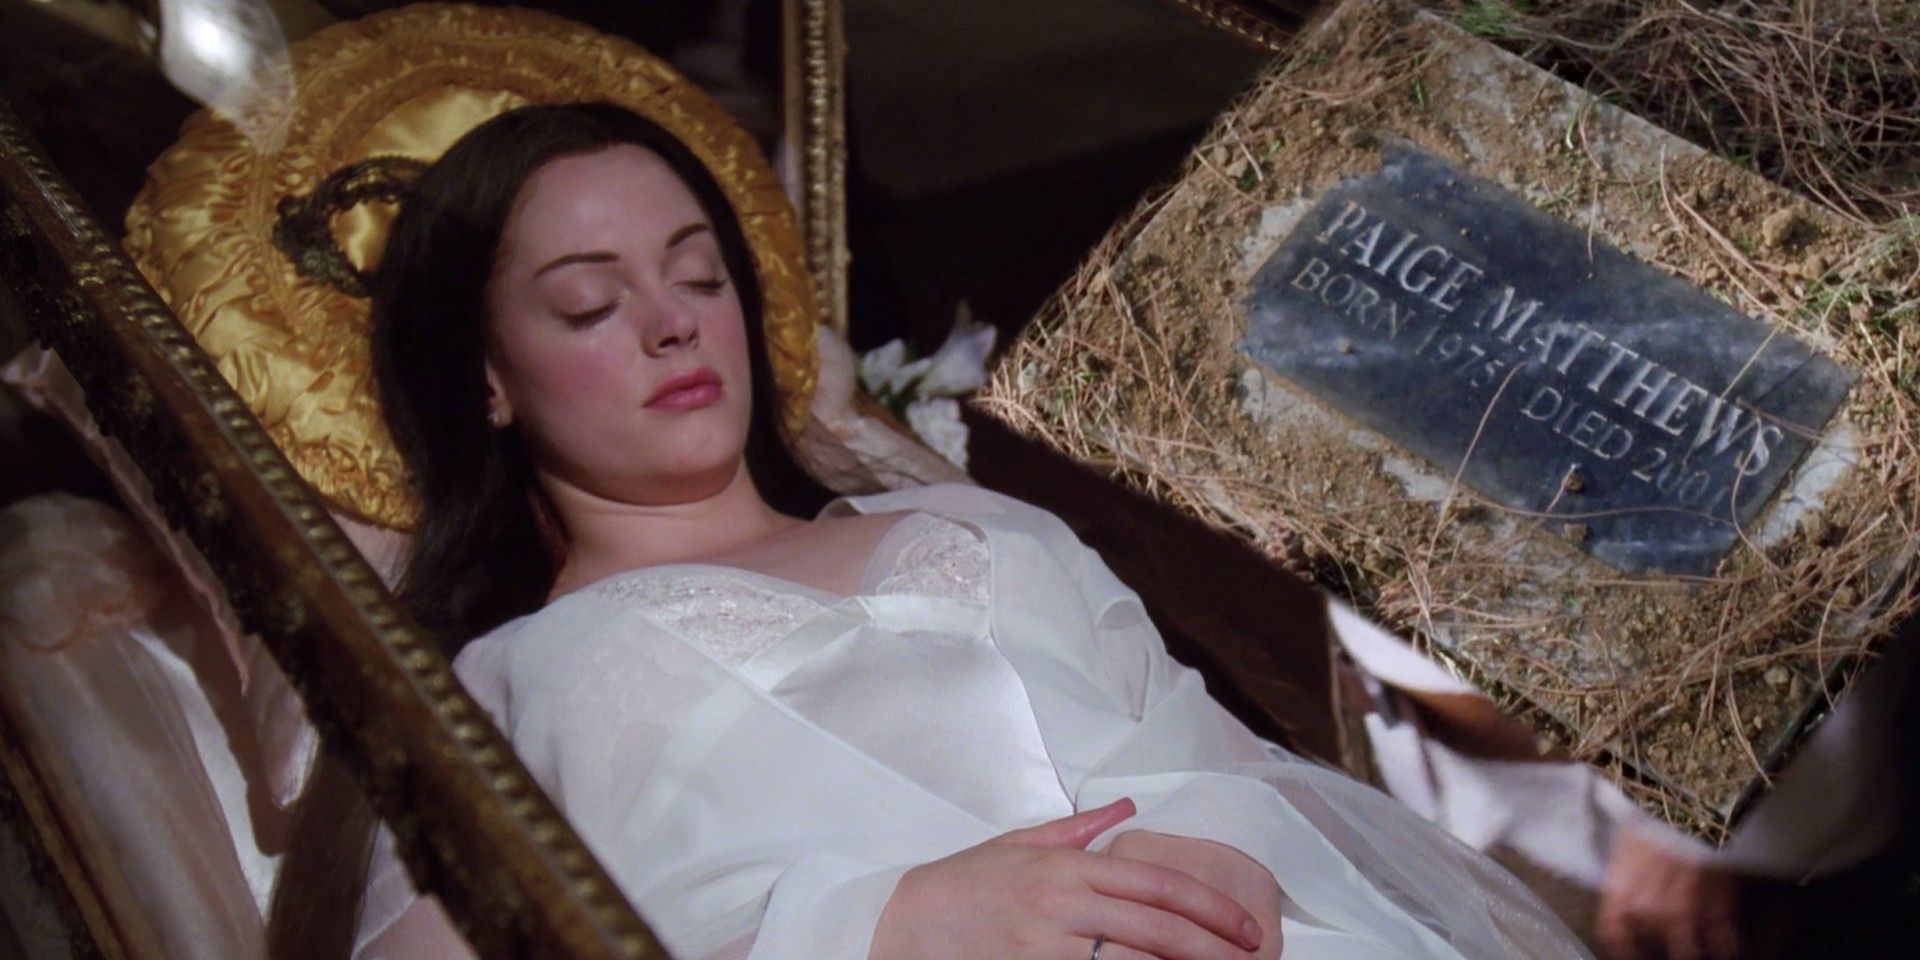 Paige Matthews from Charmed in a glass coffin, with a dated headstone